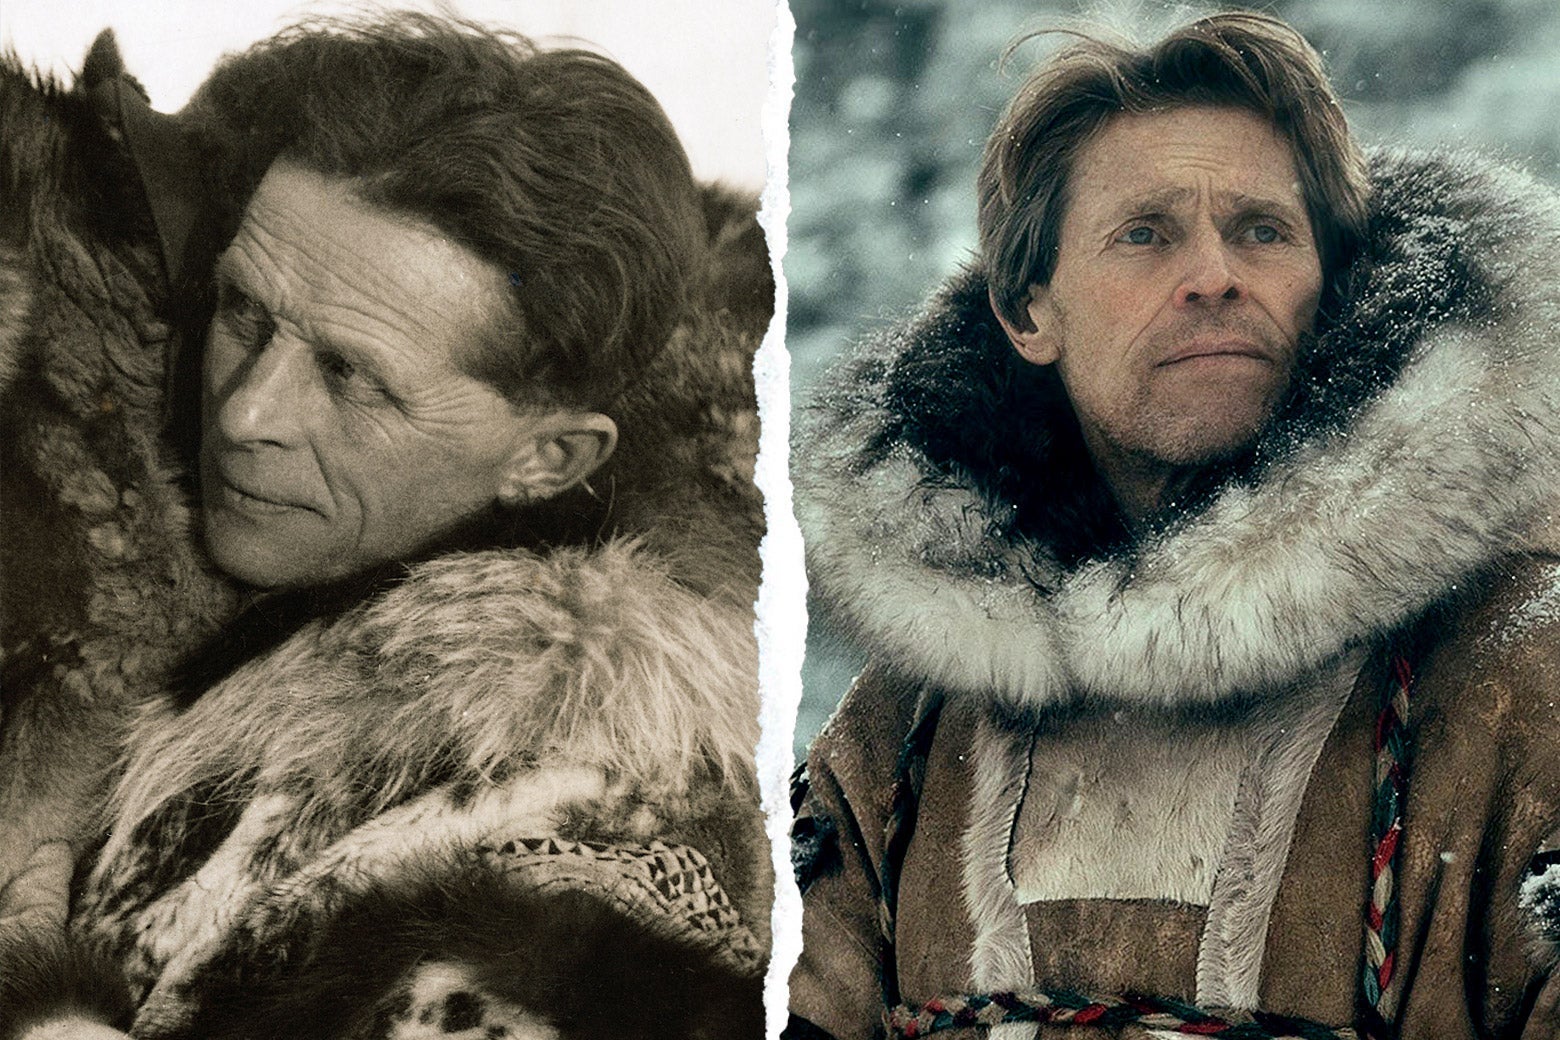 Diptych of the real Seppala and Dafoe as Seppala.